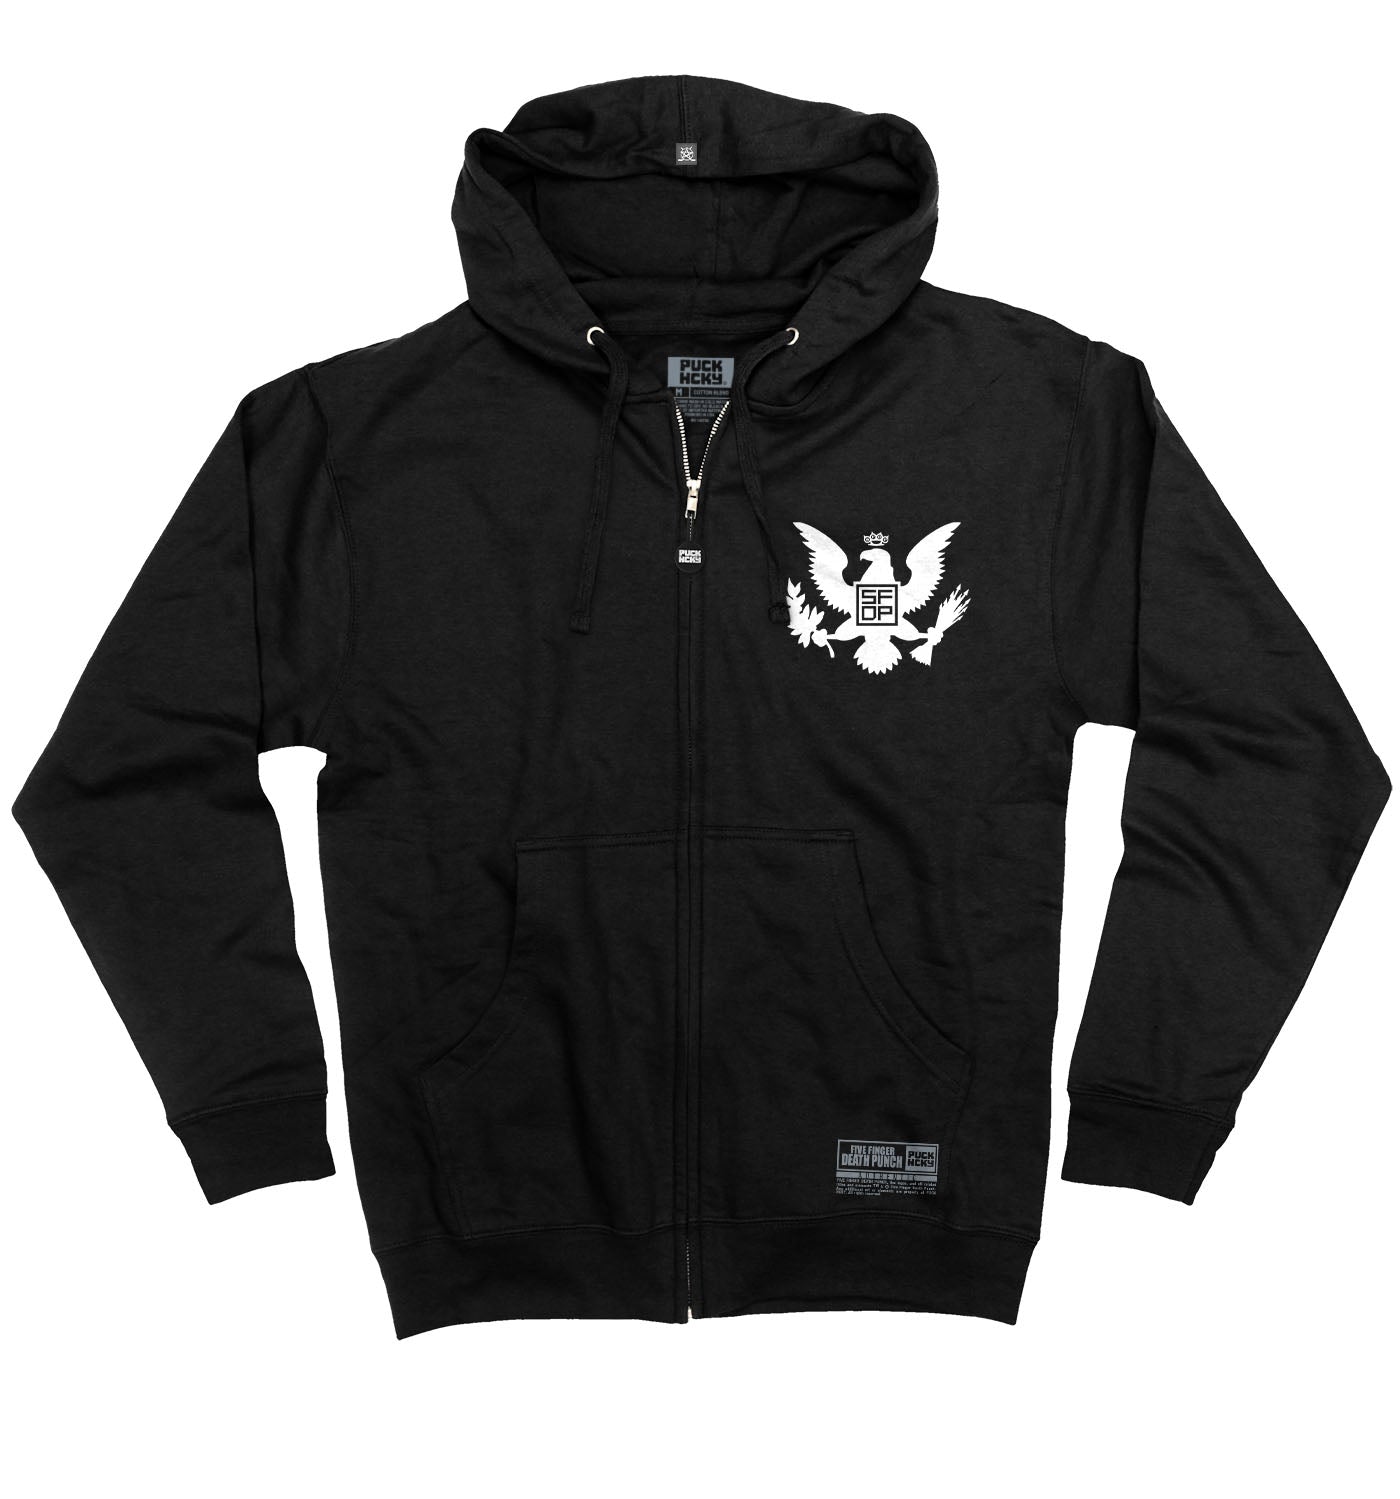 FIVE FINGER DEATH PUNCH 'EAGLE CREST' full zip hockey hoodie in black frot view